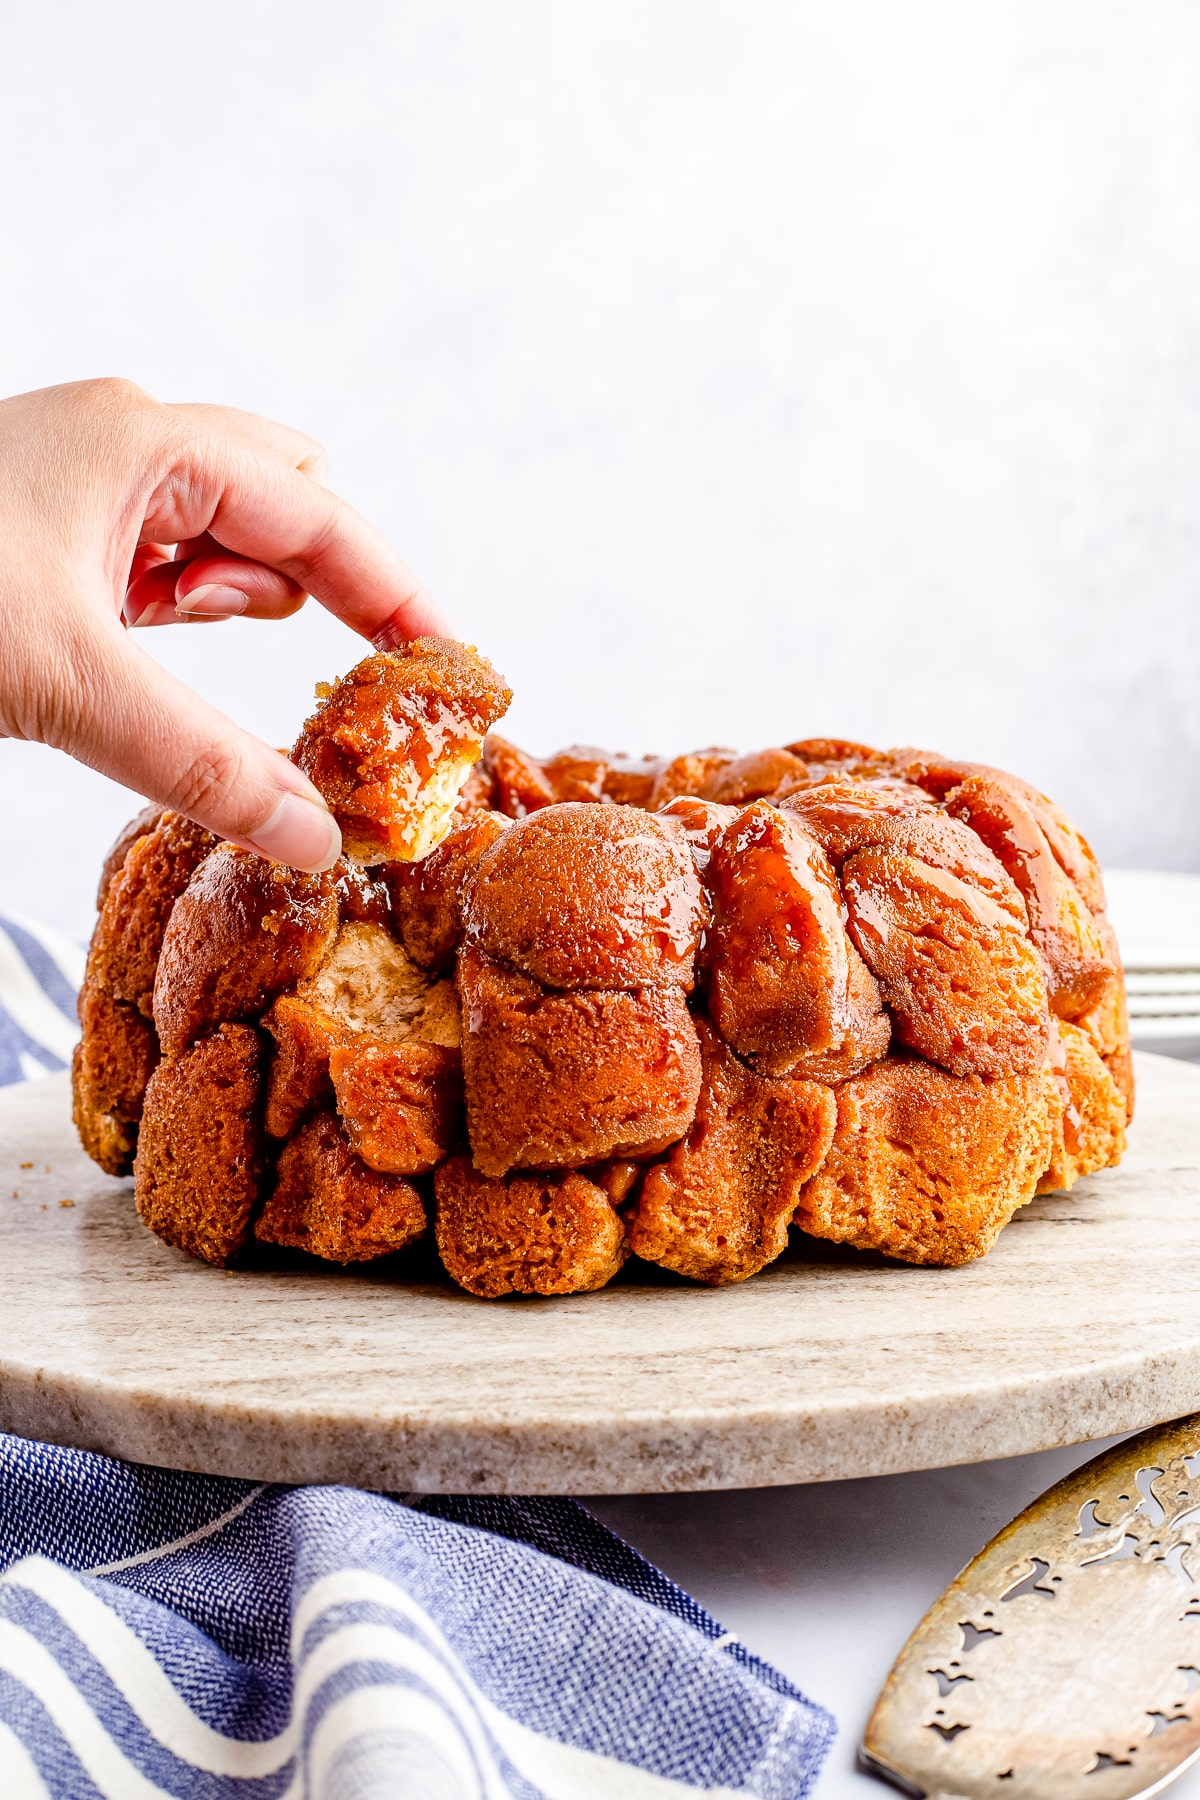 Hand pulling a piece from the Monkey Bread on platter.